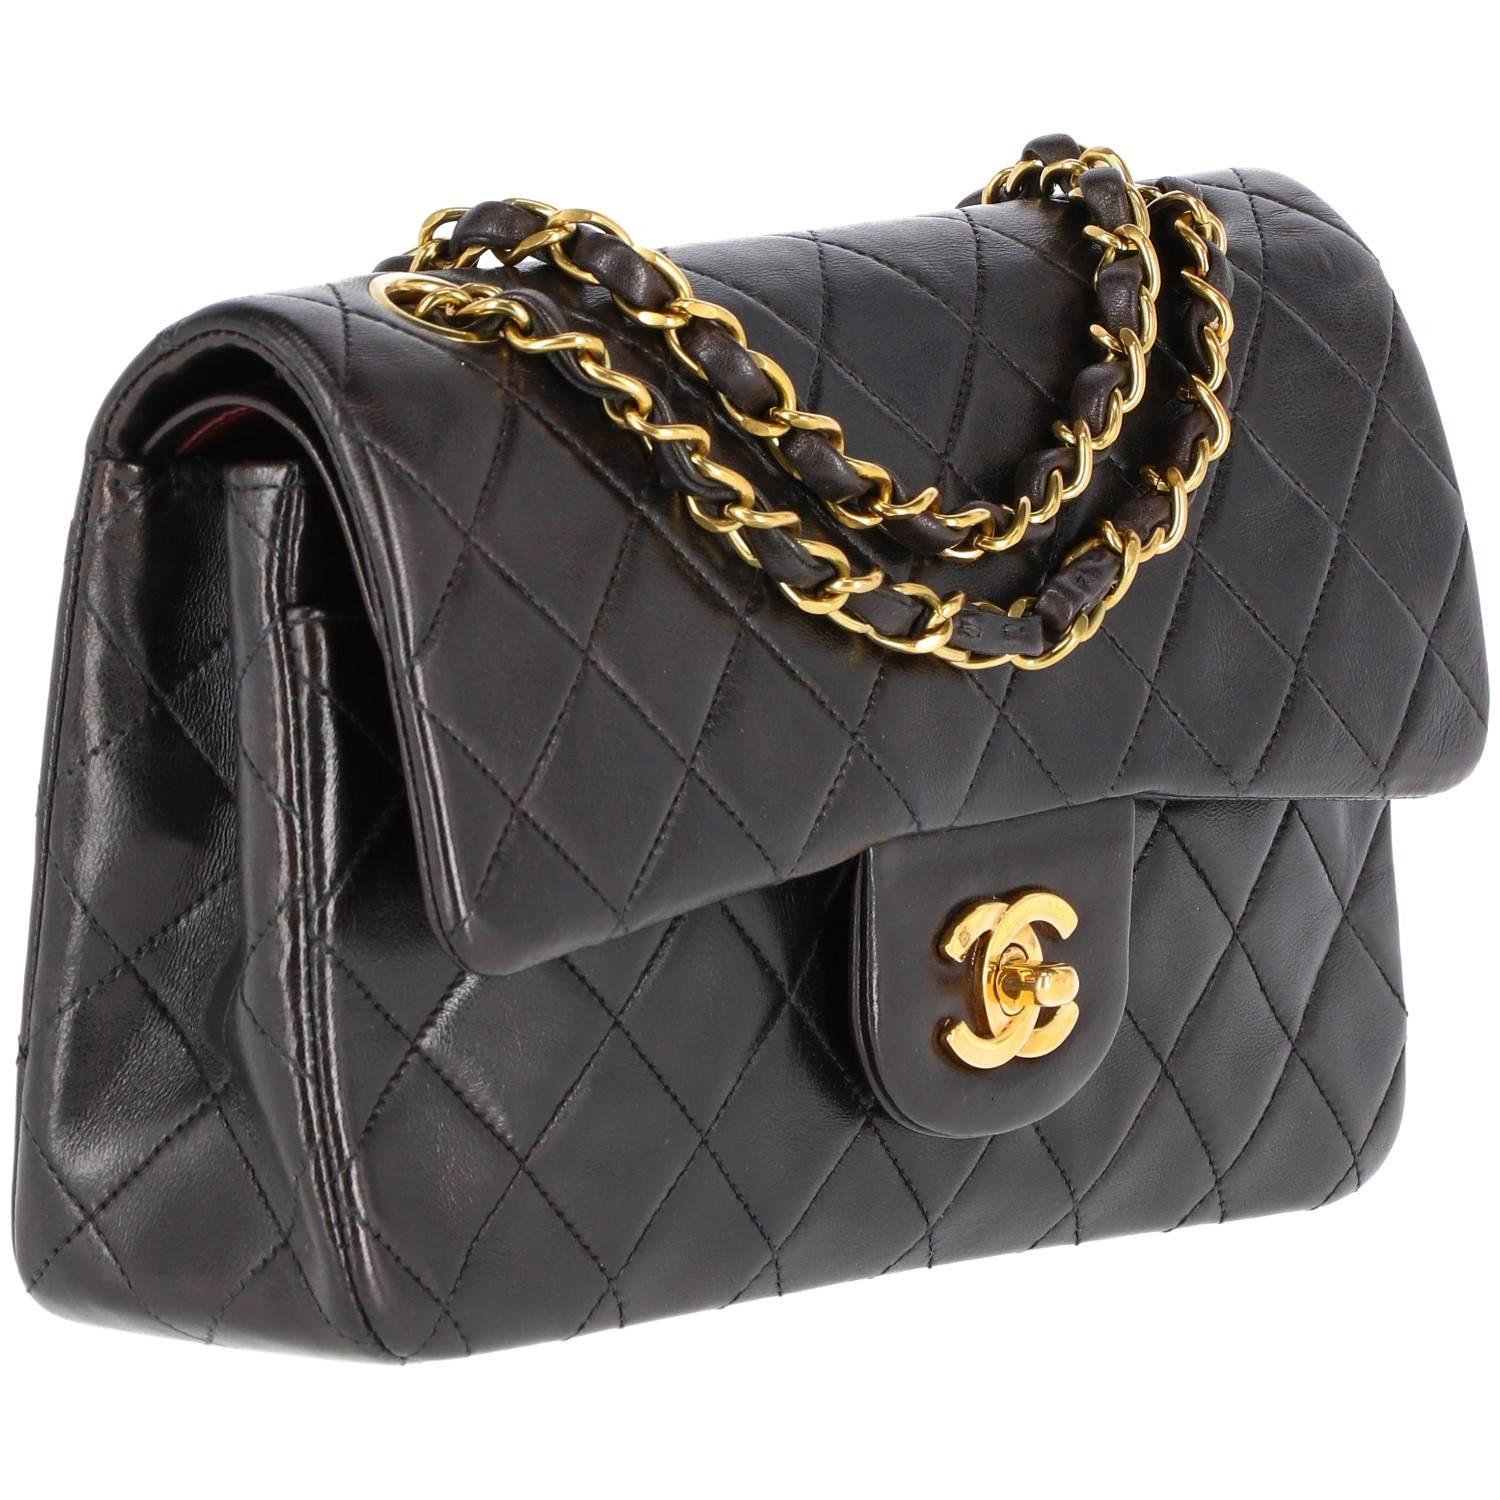 Classic Chanel vintage 2.55 bag made of black quilted leather from the 1990s. 23 cm of width. Features golden hardware in the chain strap with intertwined leather and a burgundy leather inside.
The item shows minor imperfections in the inside of the